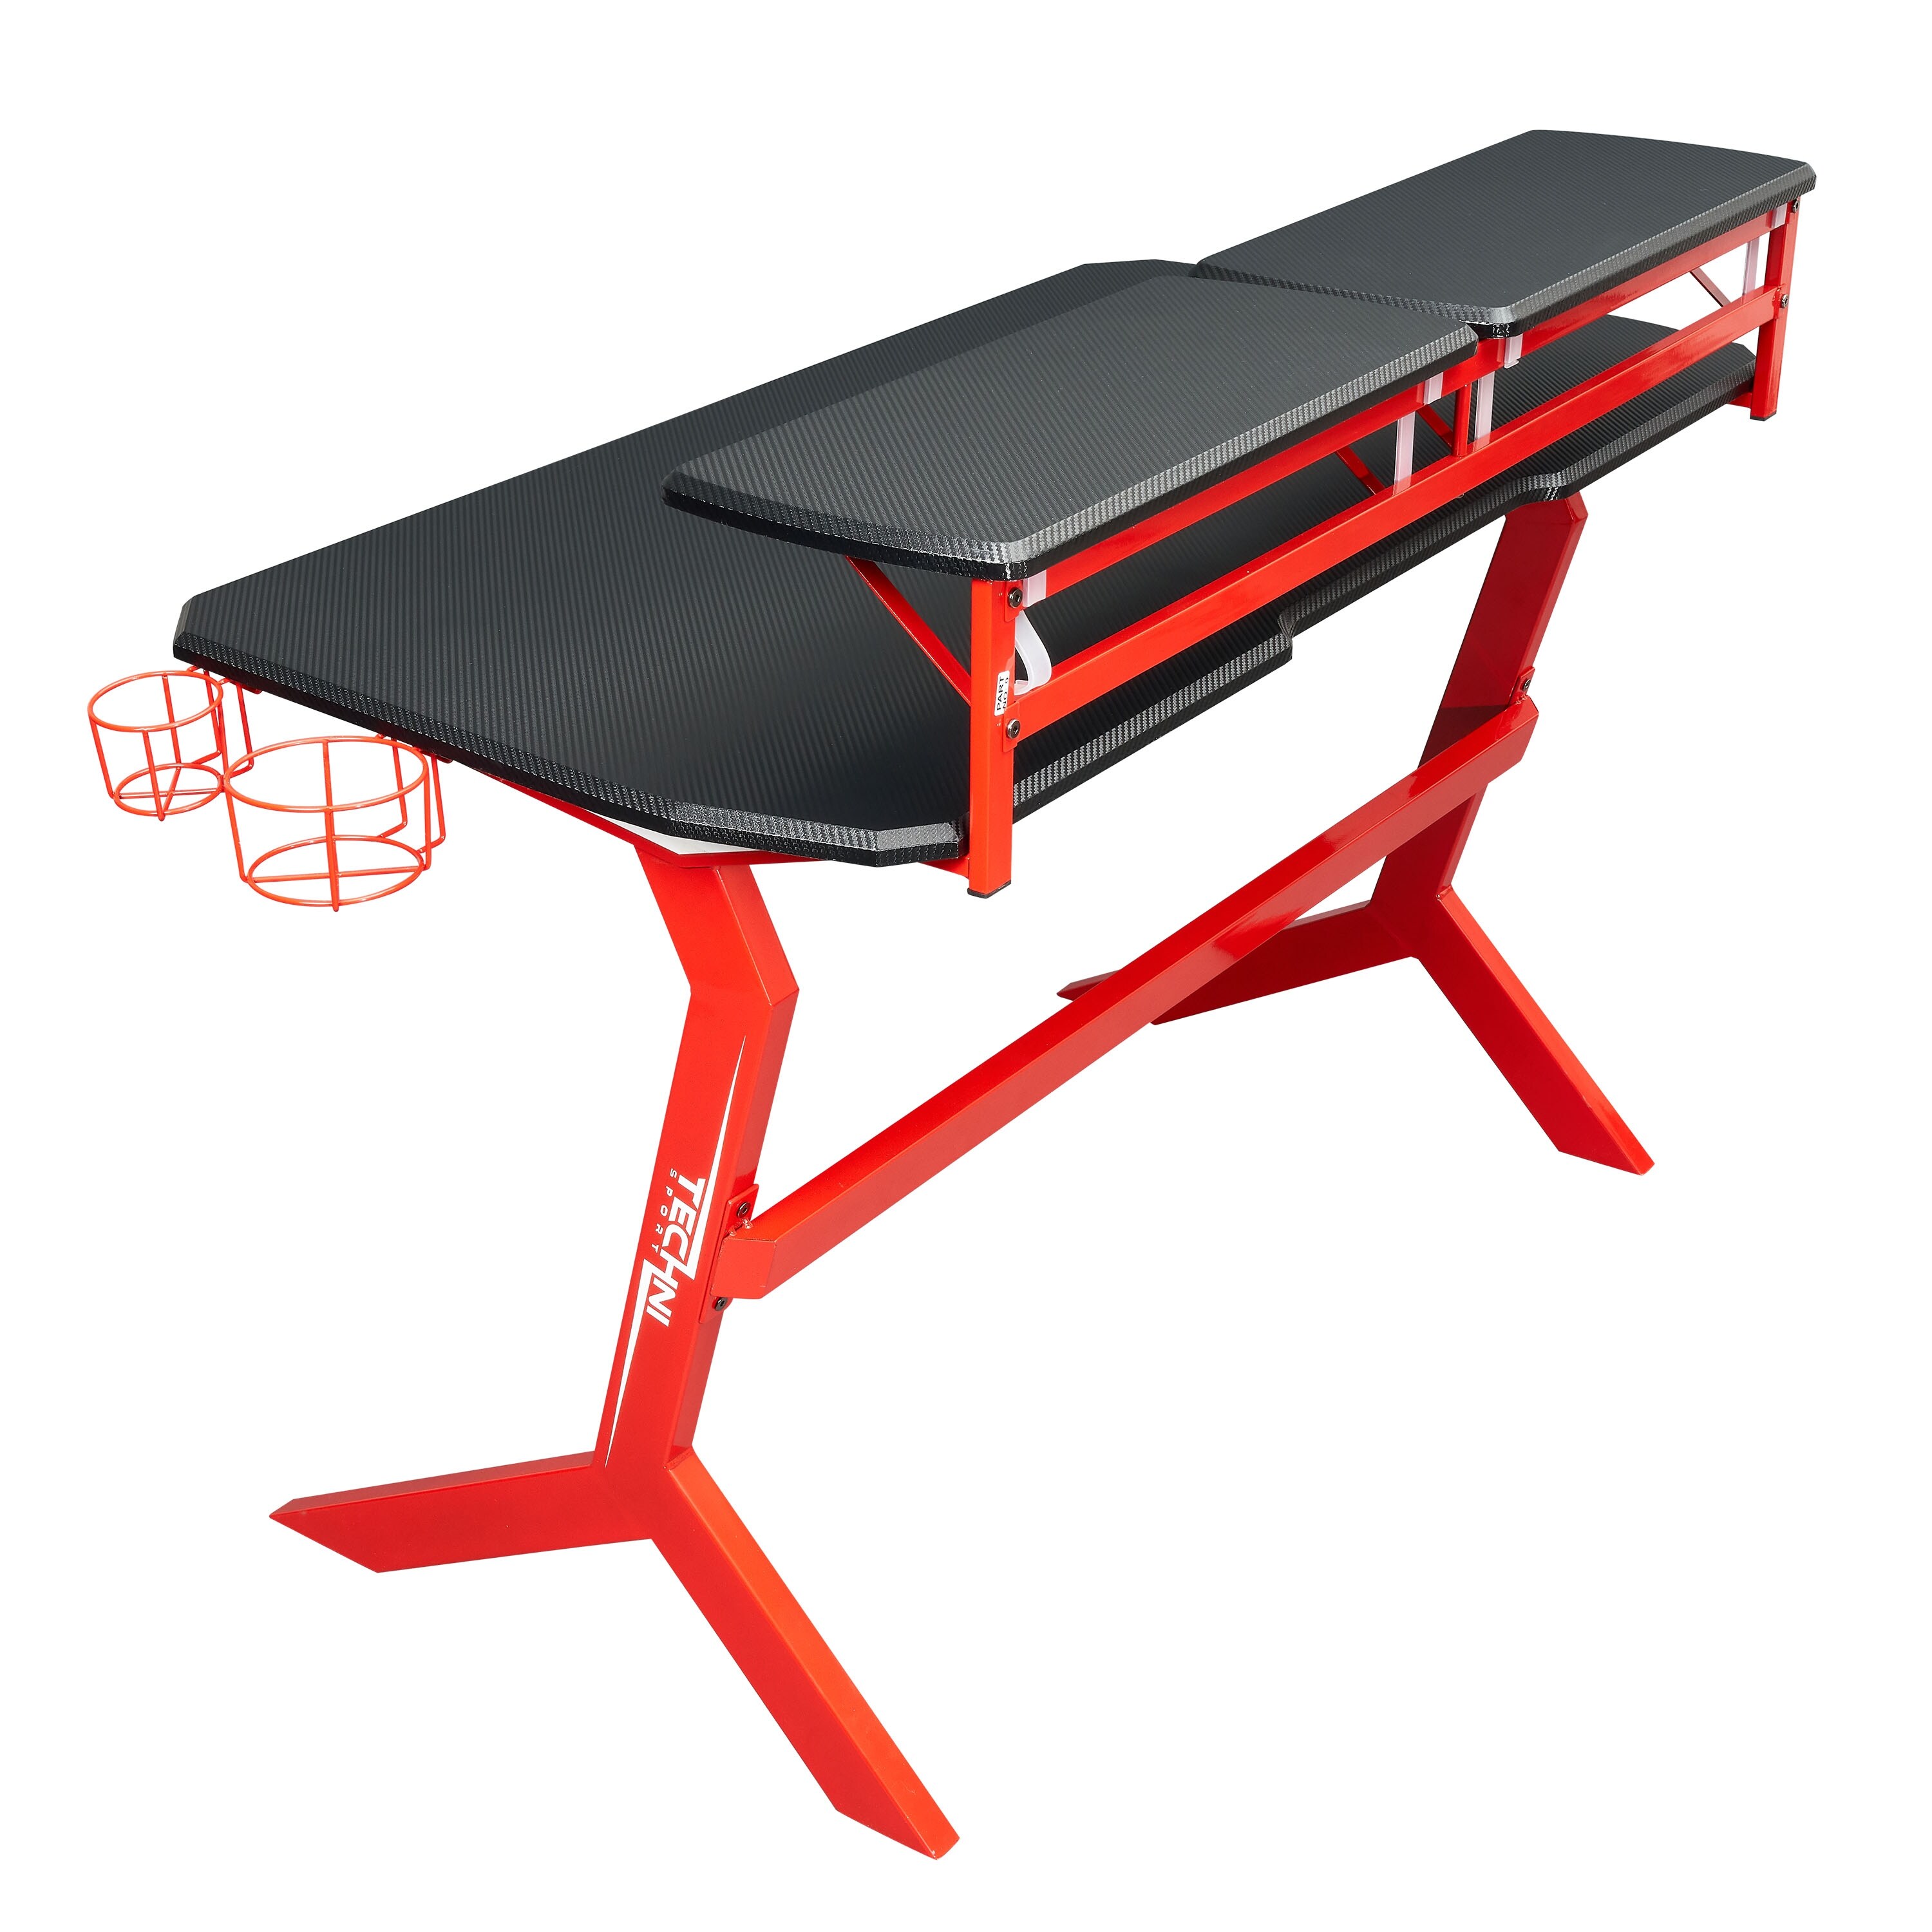 https://ak1.ostkcdn.com/images/products/is/images/direct/685f64d47286d487d18f6b42f81377004d8d5ace/Sport-Gaming-Desk-Two-Way-Computer-Desk-with-Elevated-Monitor-Stands-CD-Rack-Cup-Holder-%26-Accessories-Storage-Laptop-Workstation.jpg